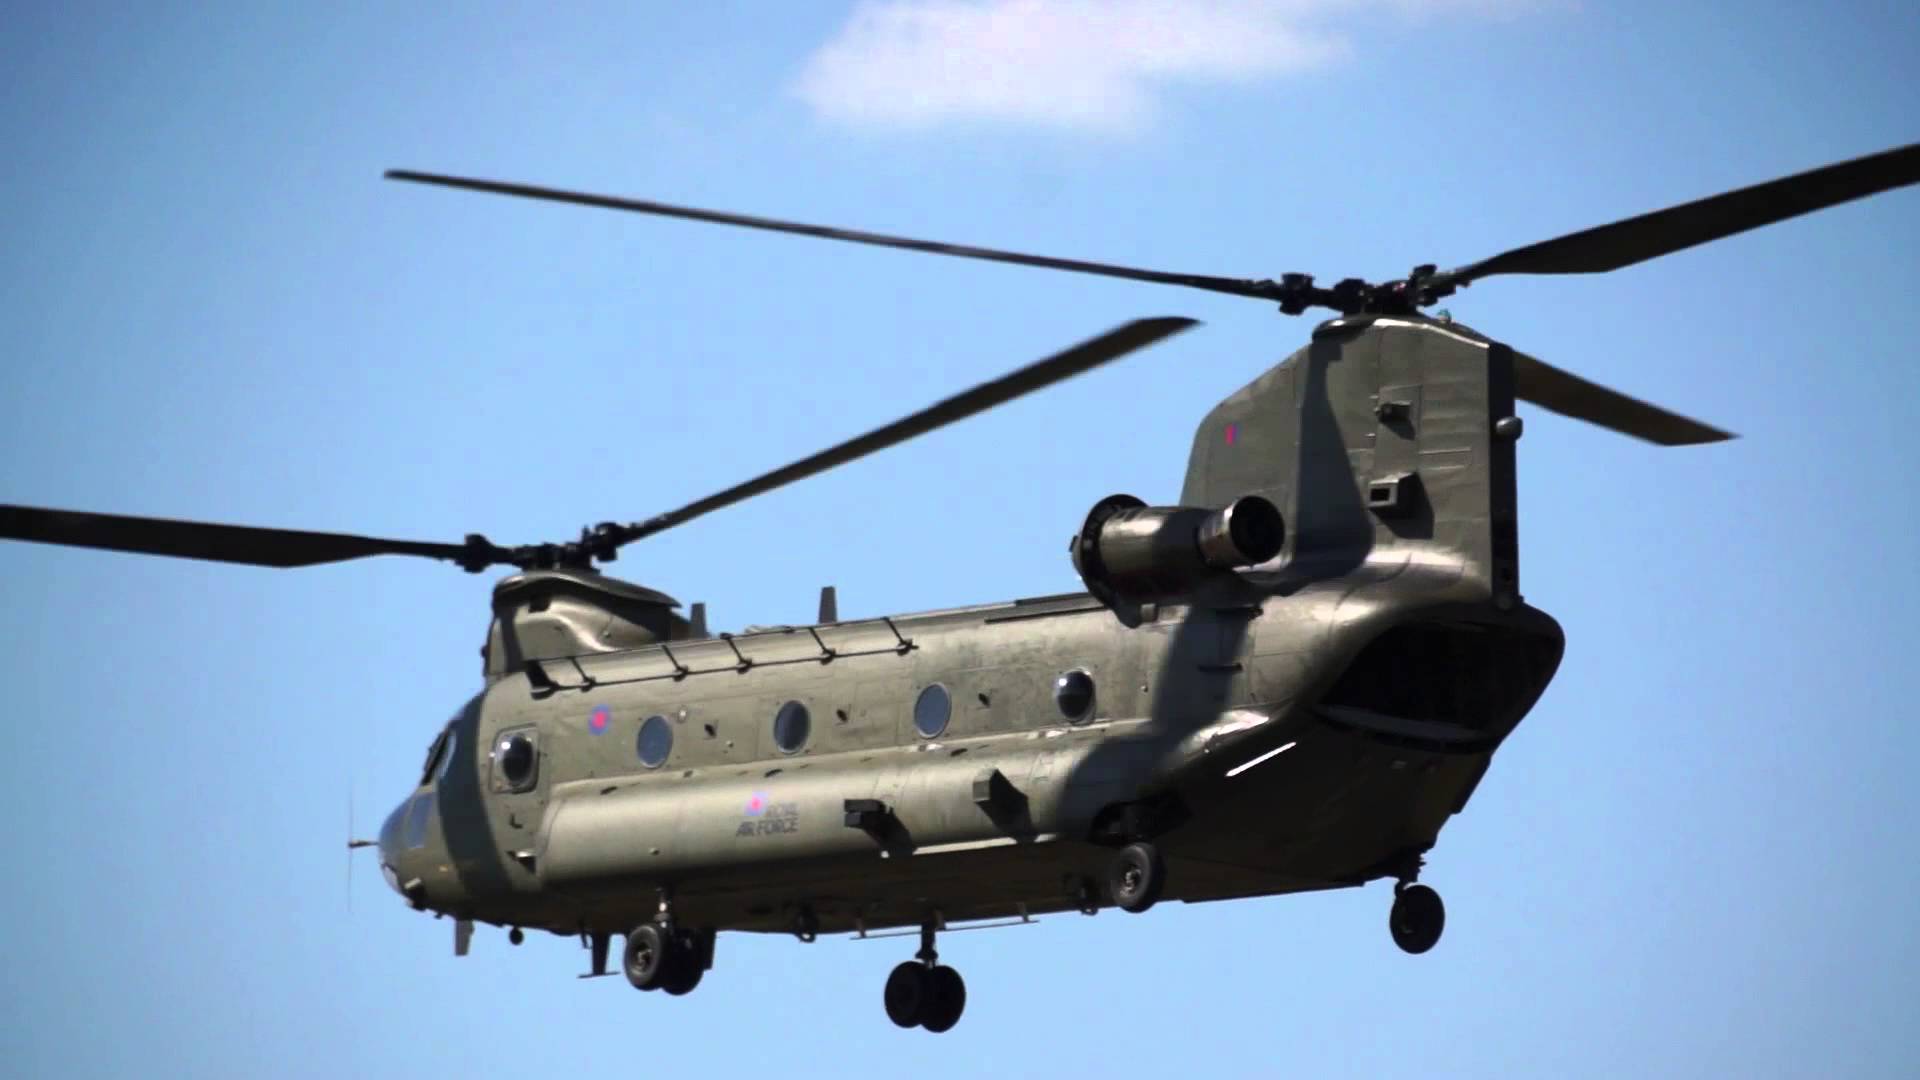 Pin Boeing Ch Chinook Wallpaper Aircraft On